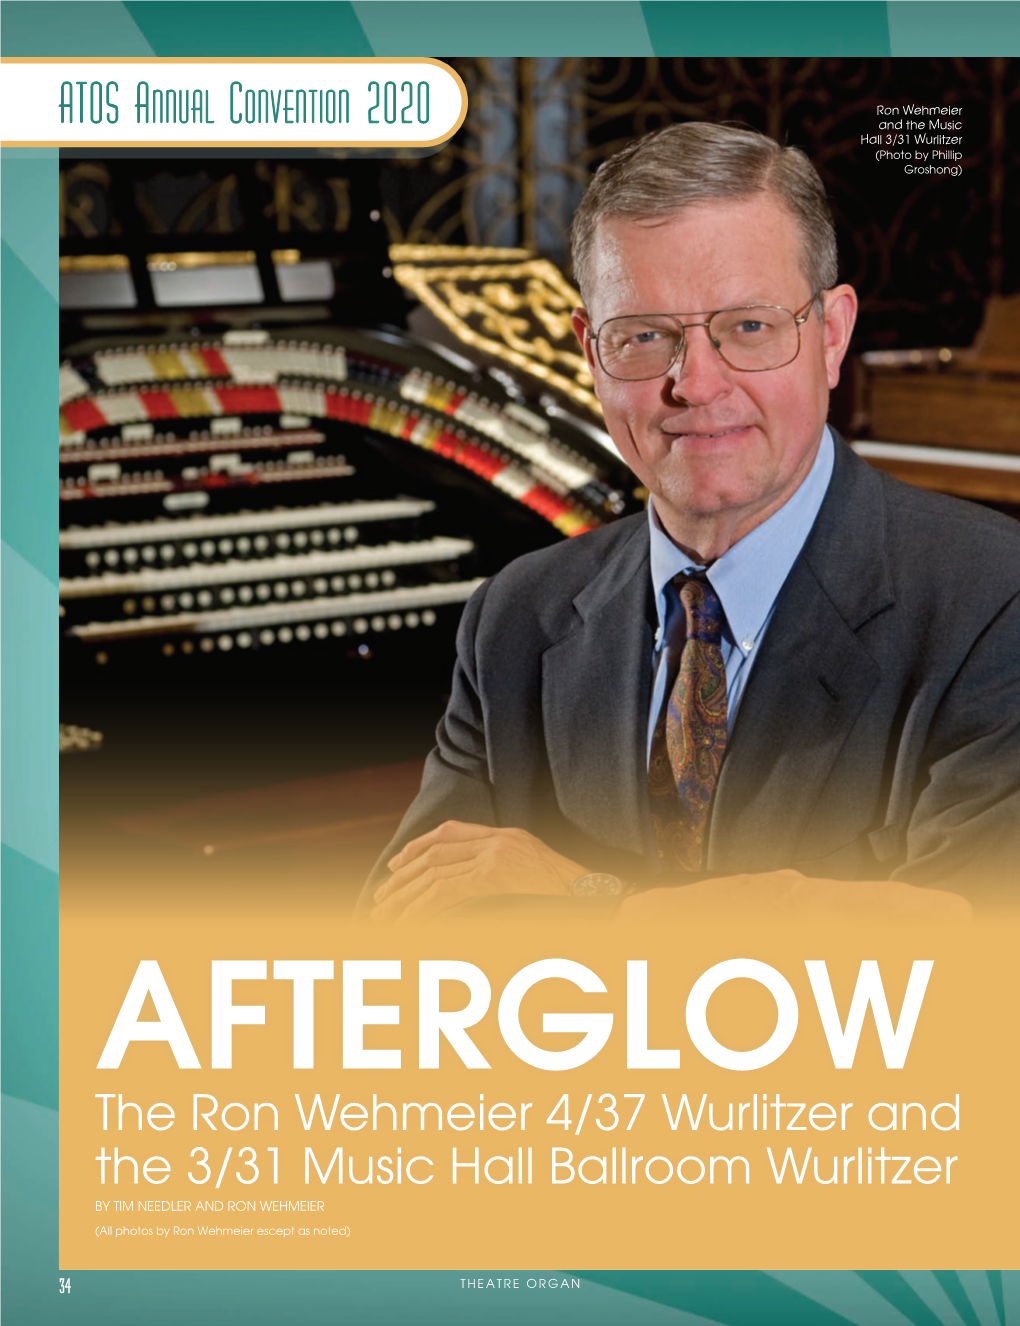 ATOS Annual Convention 2020 Ron Wehmeier and the Music Hall 3/31 Wurlitzer (Photo by Phillip Groshong)